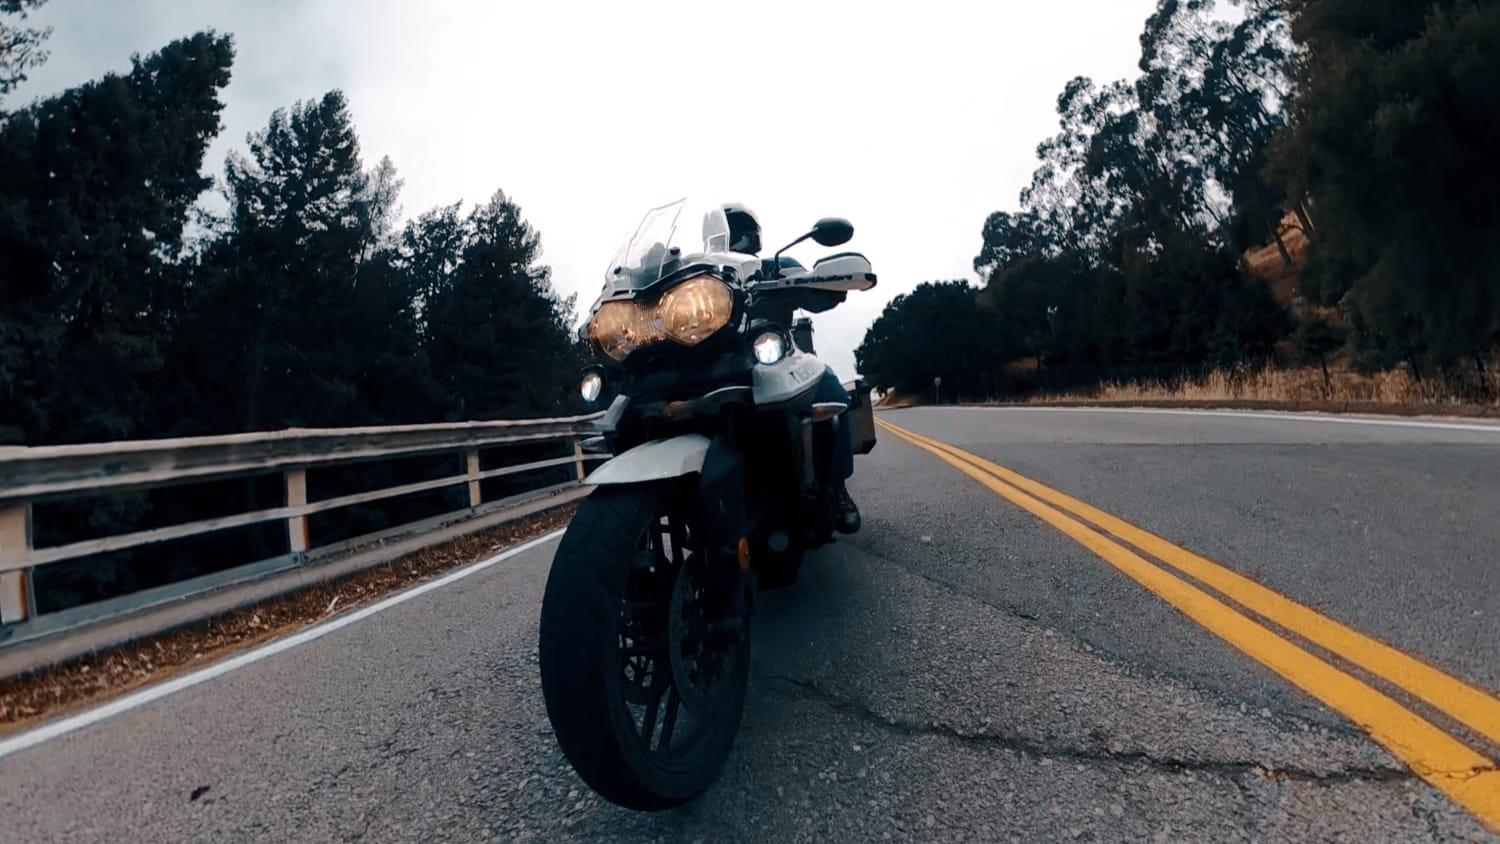 Testing out a GoPro MAX on a motorcycle